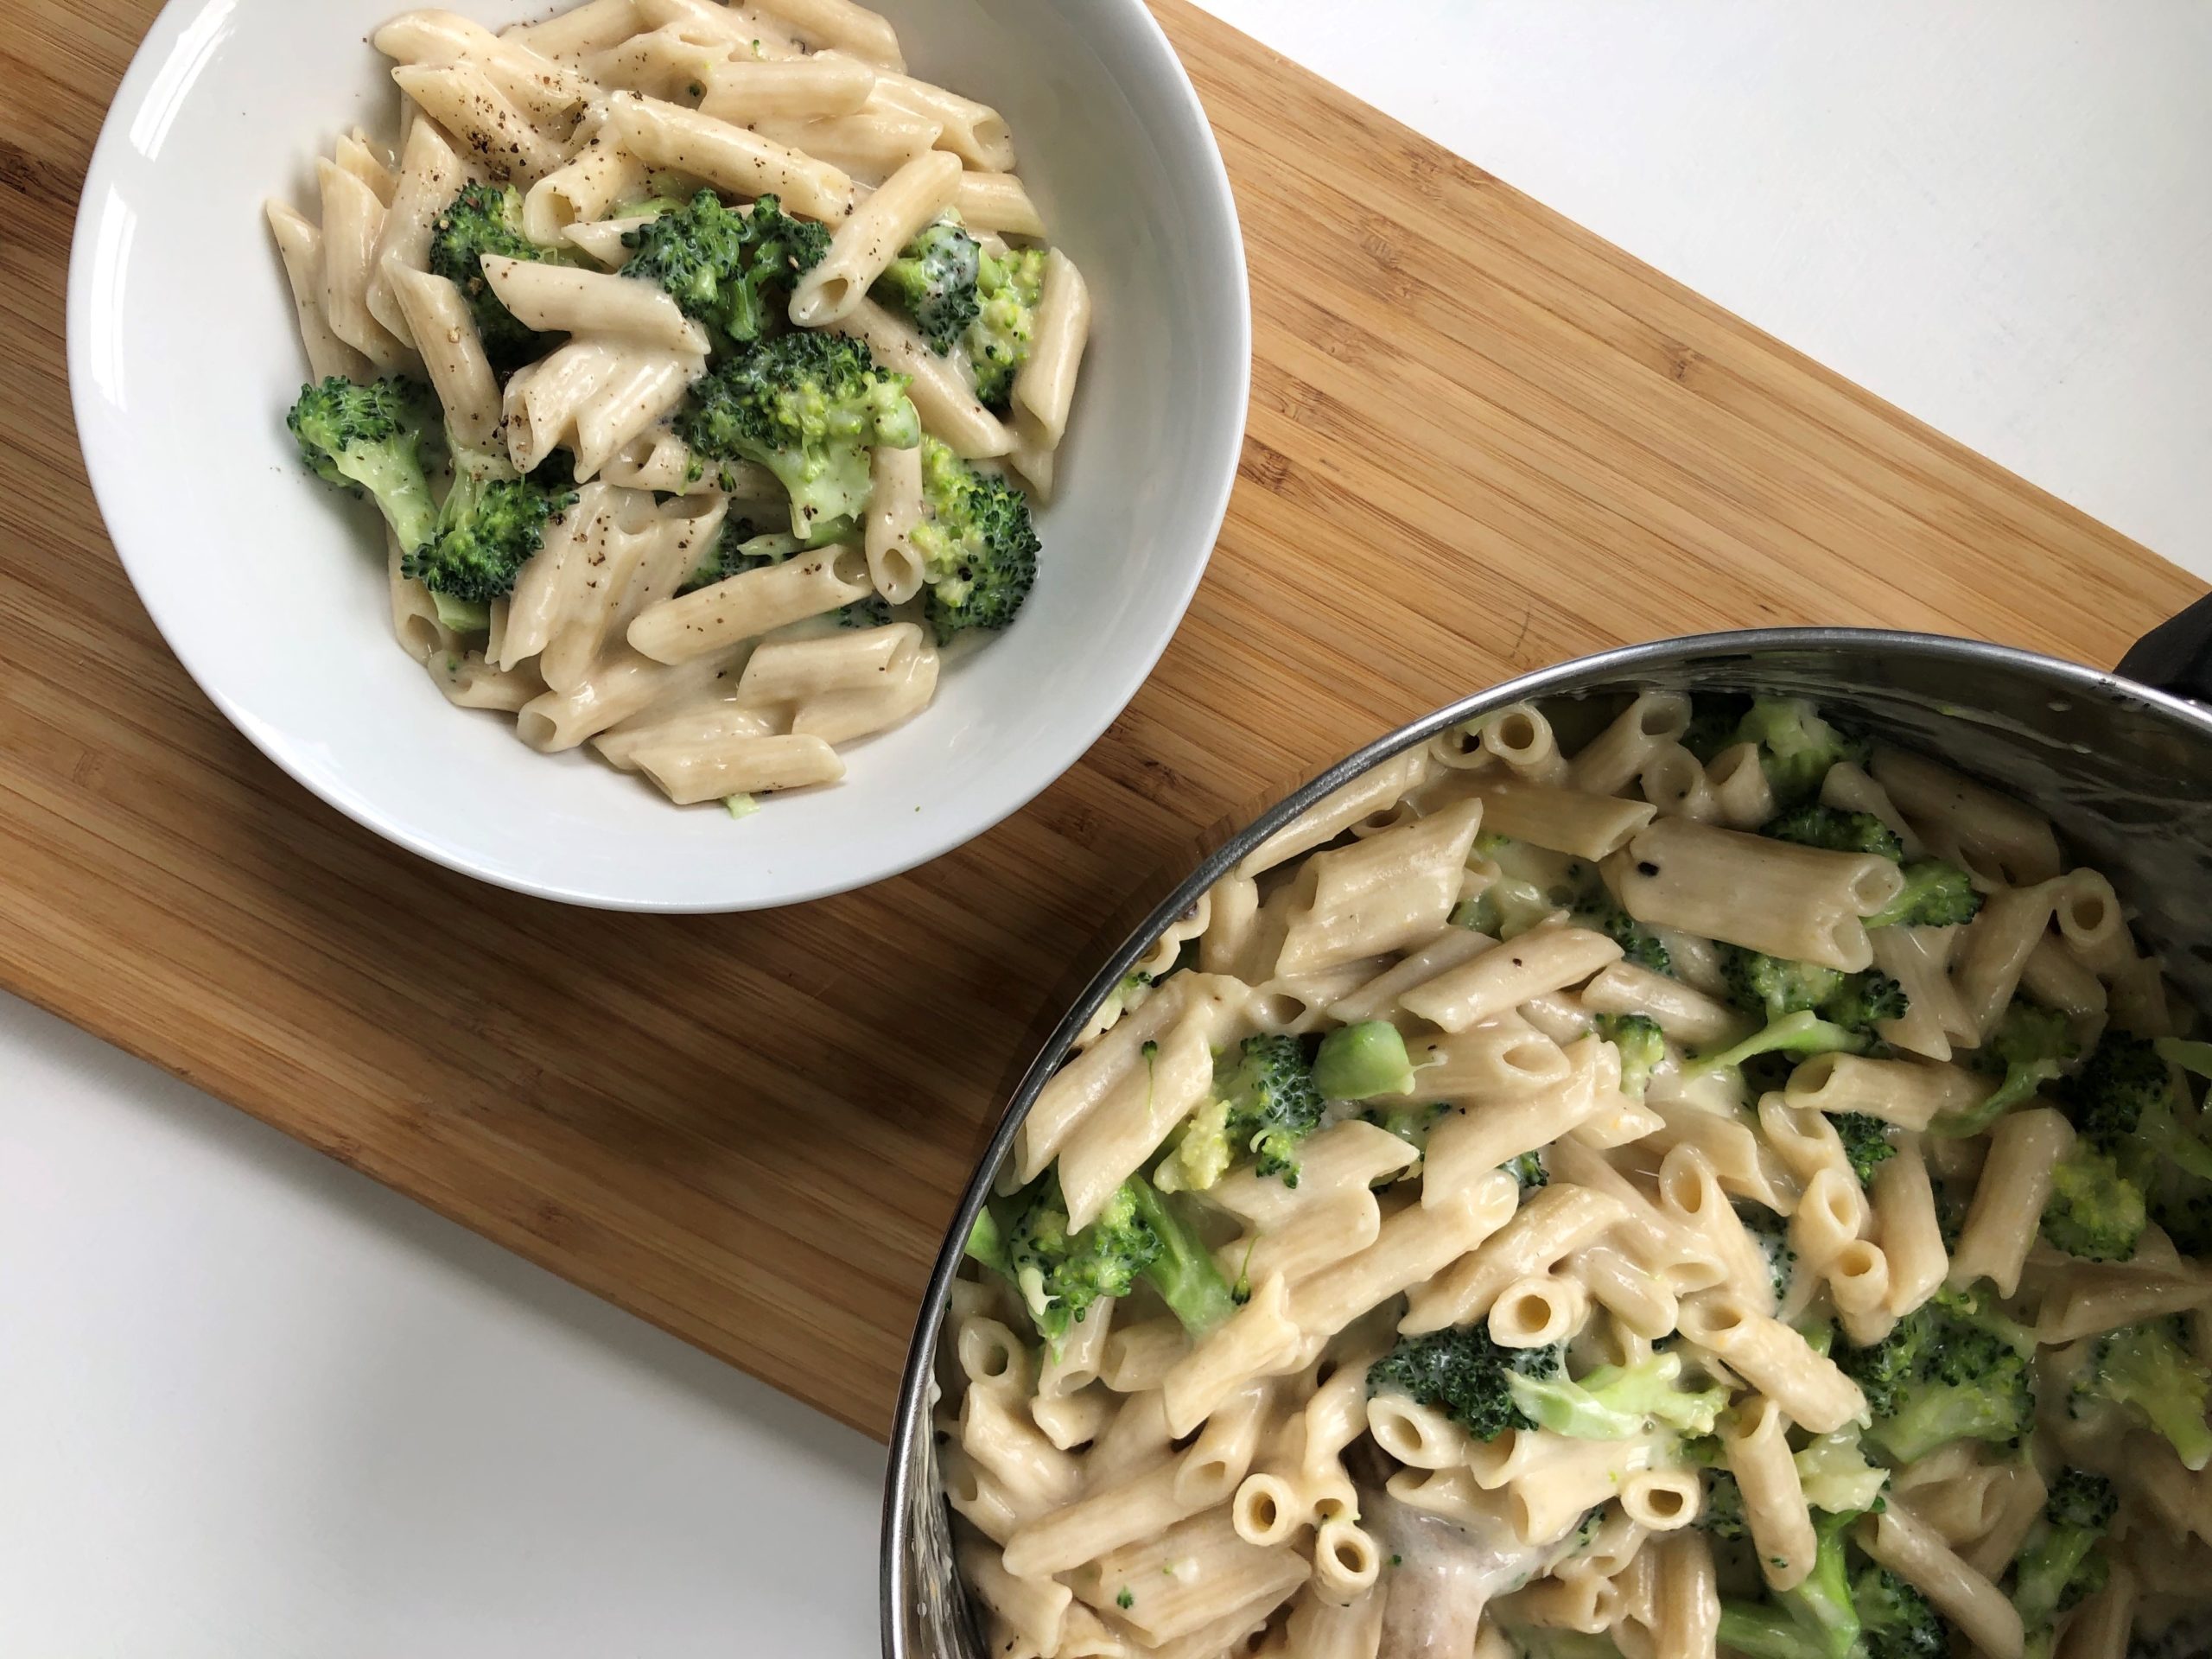 Mac and cheese with broccoli used for nutrition education